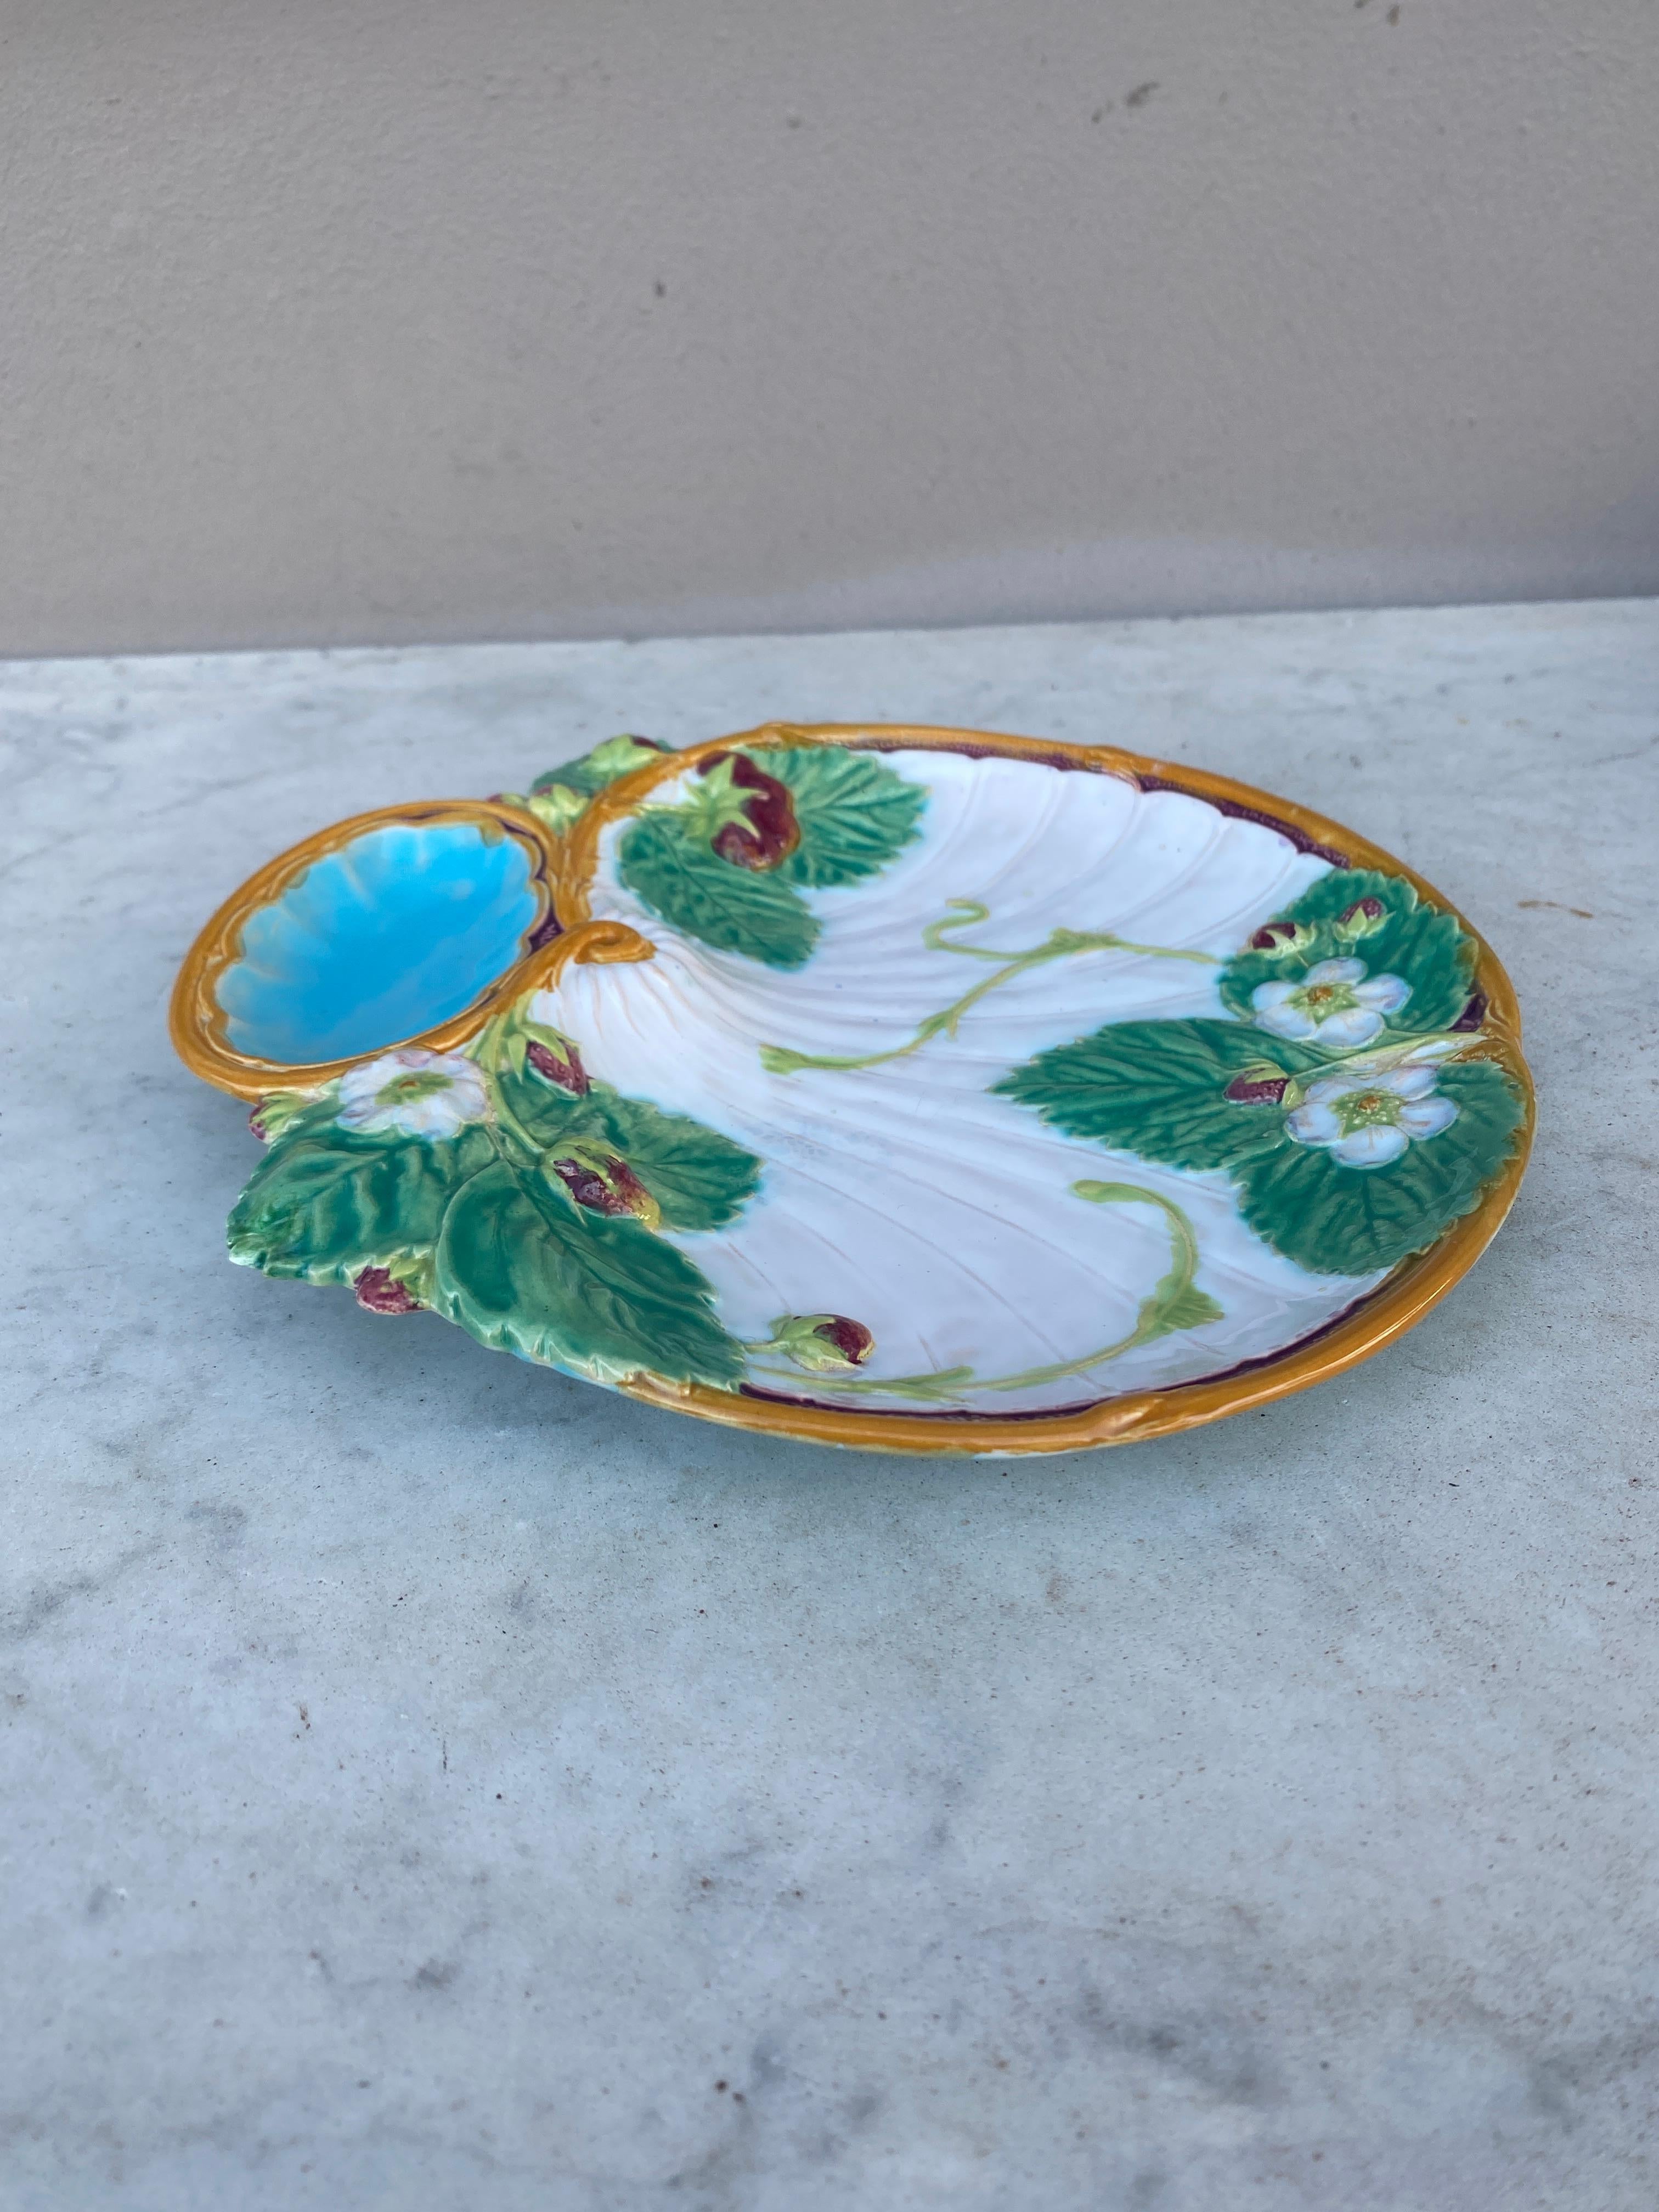 19th Century Majolica Strawberries Minton Plate In Good Condition For Sale In Austin, TX